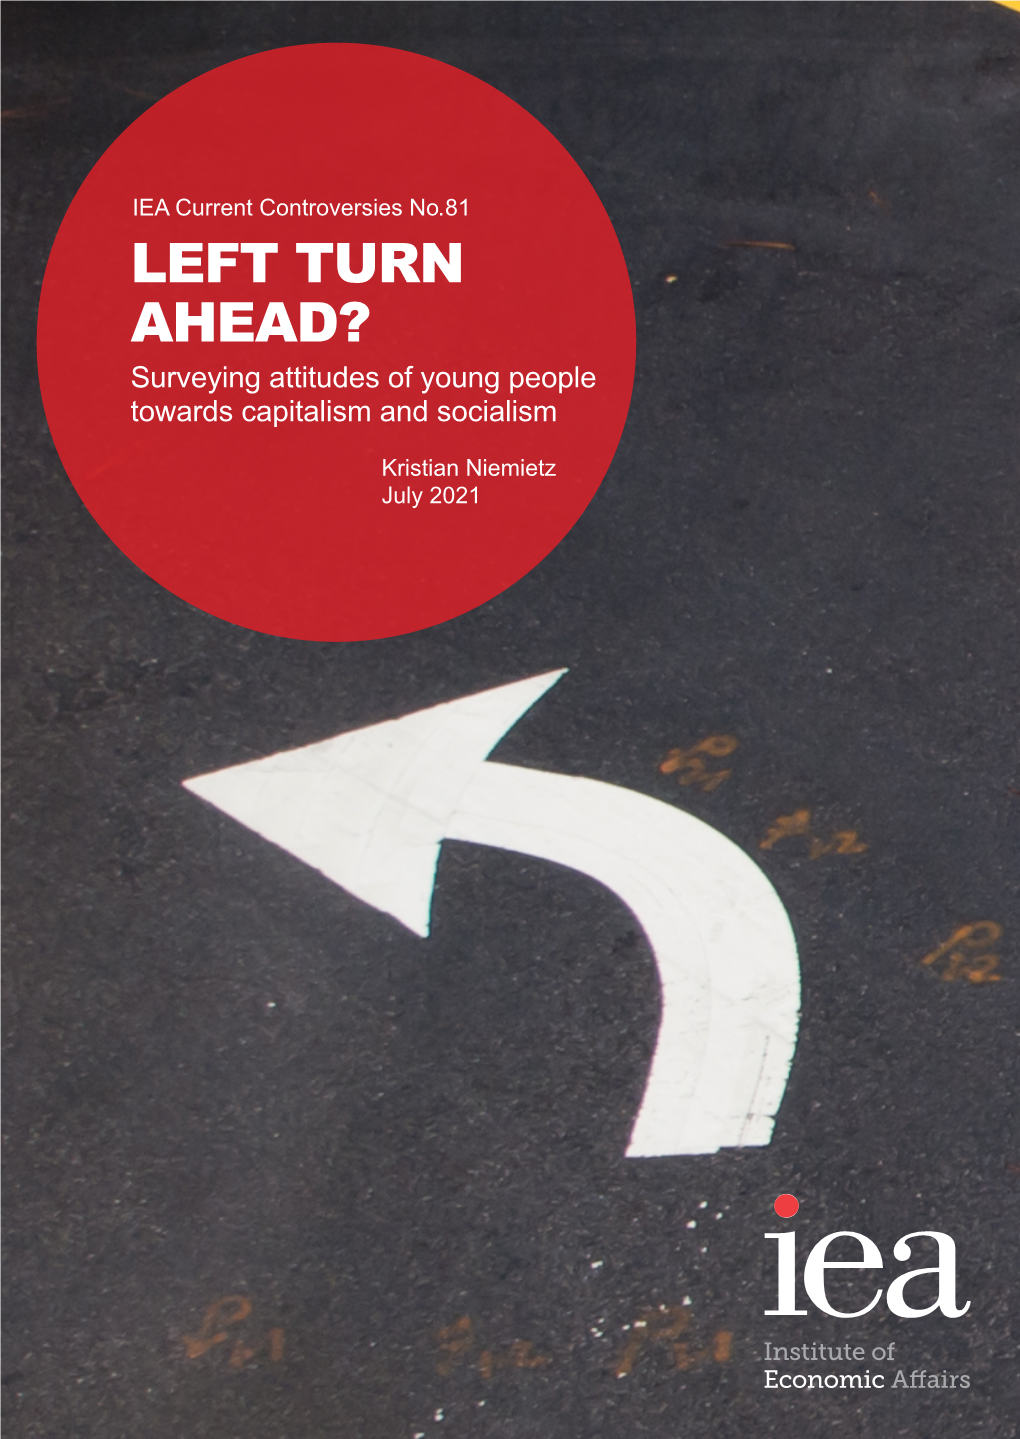 LEFT TURN AHEAD? Surveying Attitudes of Young People Towards Capitalism and Socialism